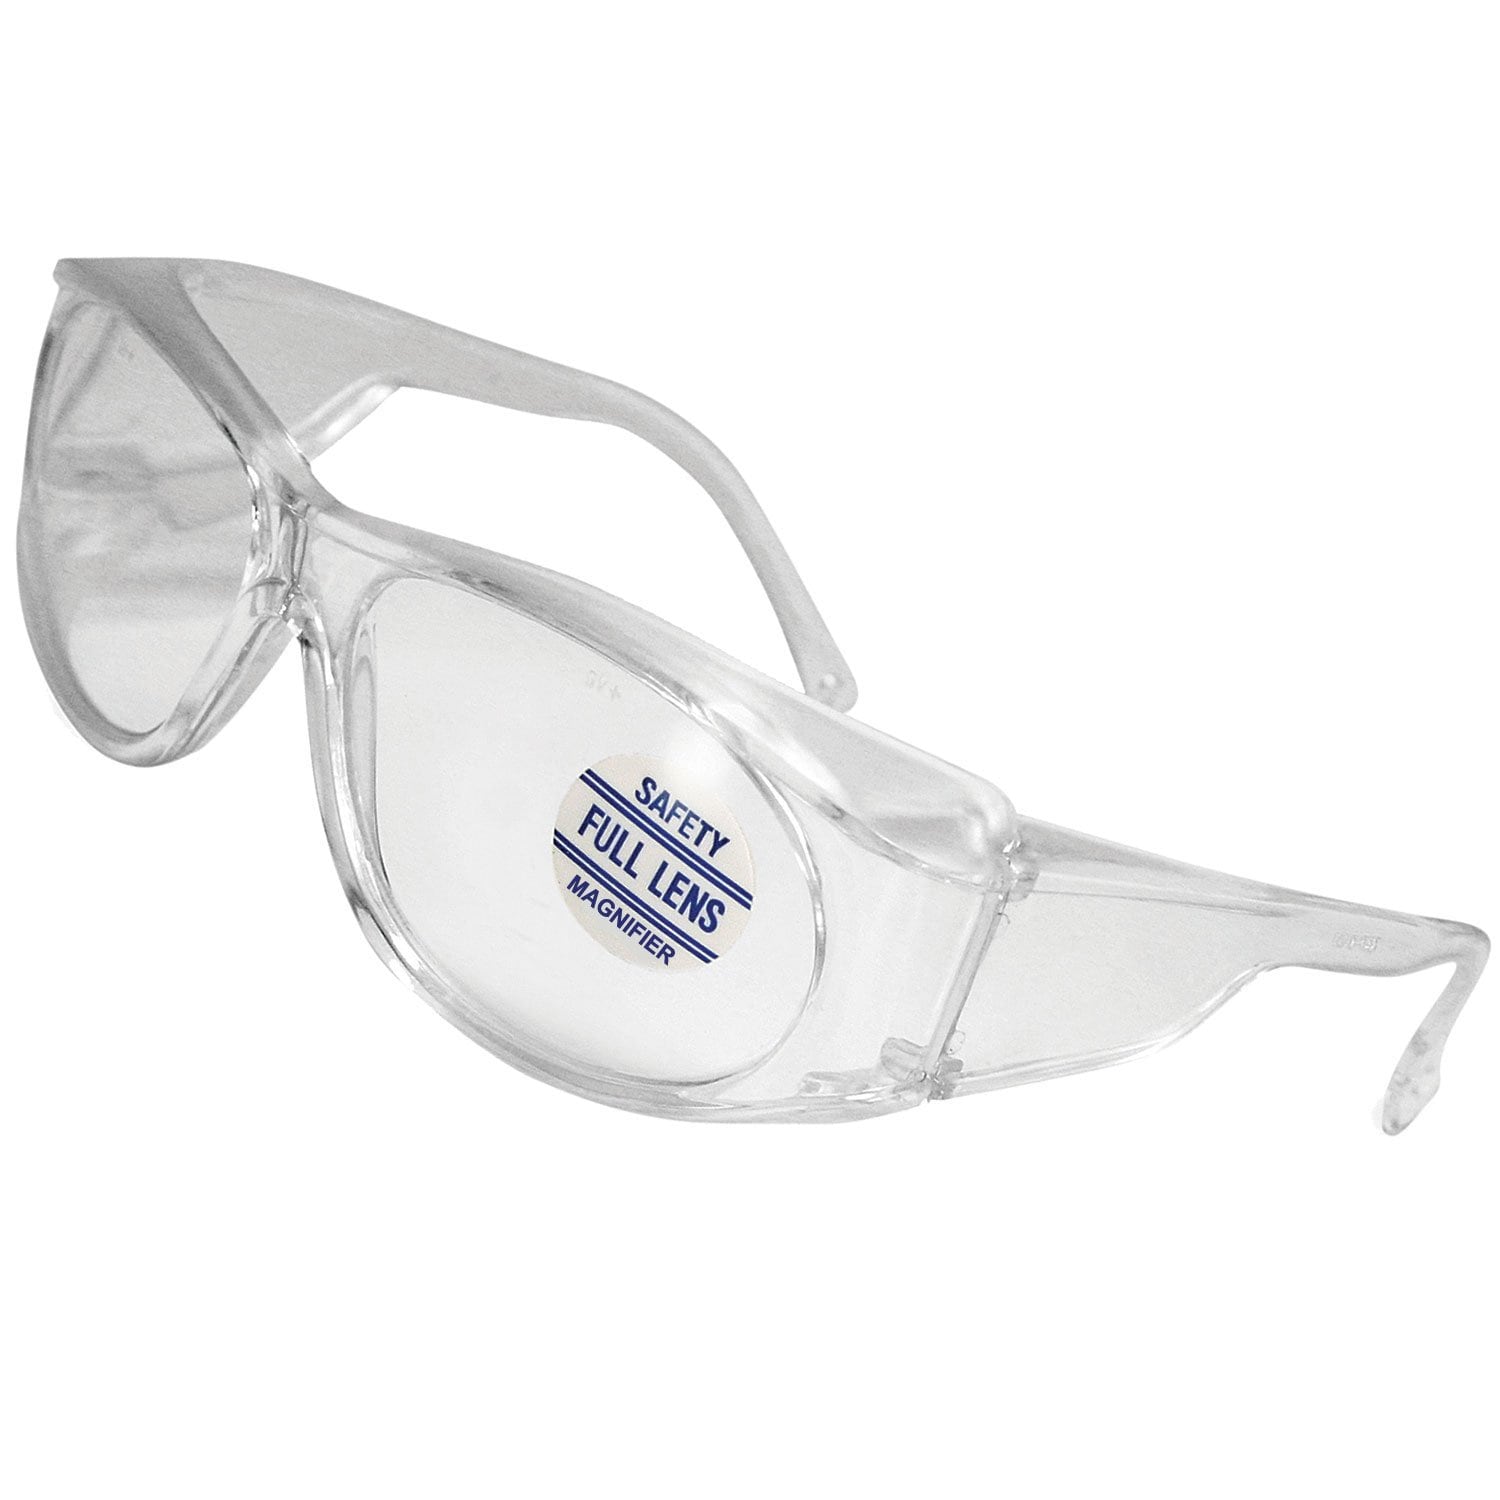 Head Magnifier Glasses With 2 LED Lights Magnifying Eyeglasses for